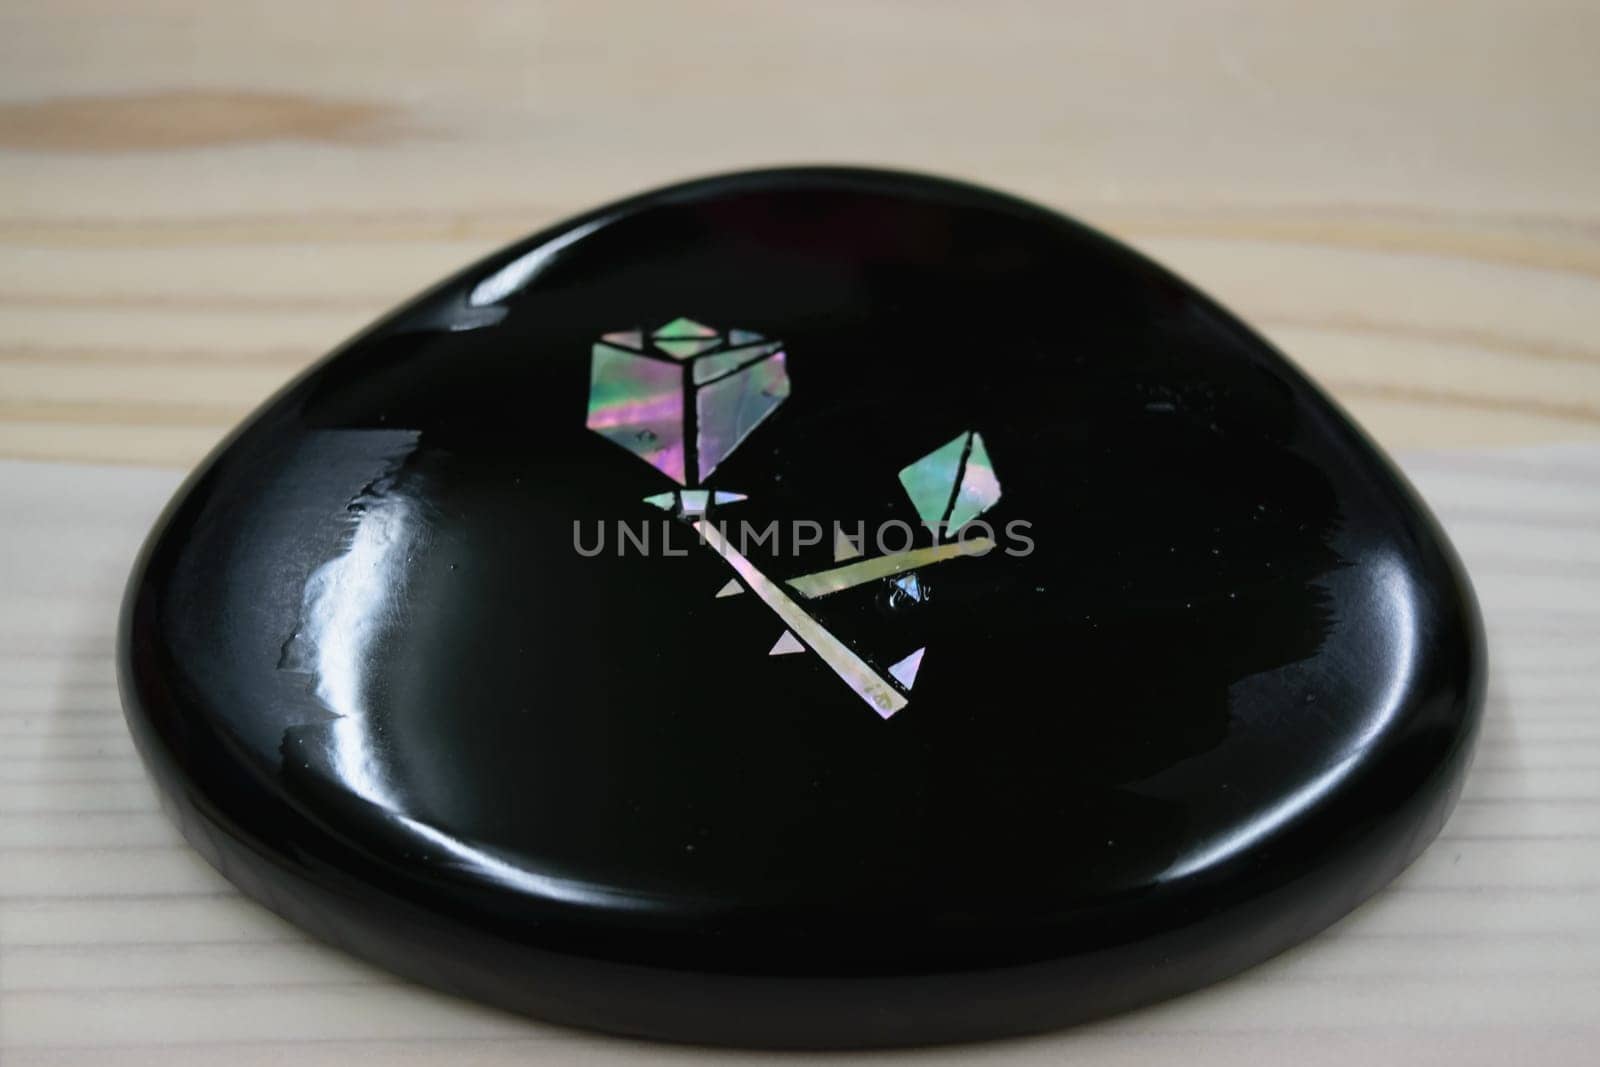 A smooth, black, polished stone with geometric inlay designs made of iridescent flower, placed on a light wooden surface.